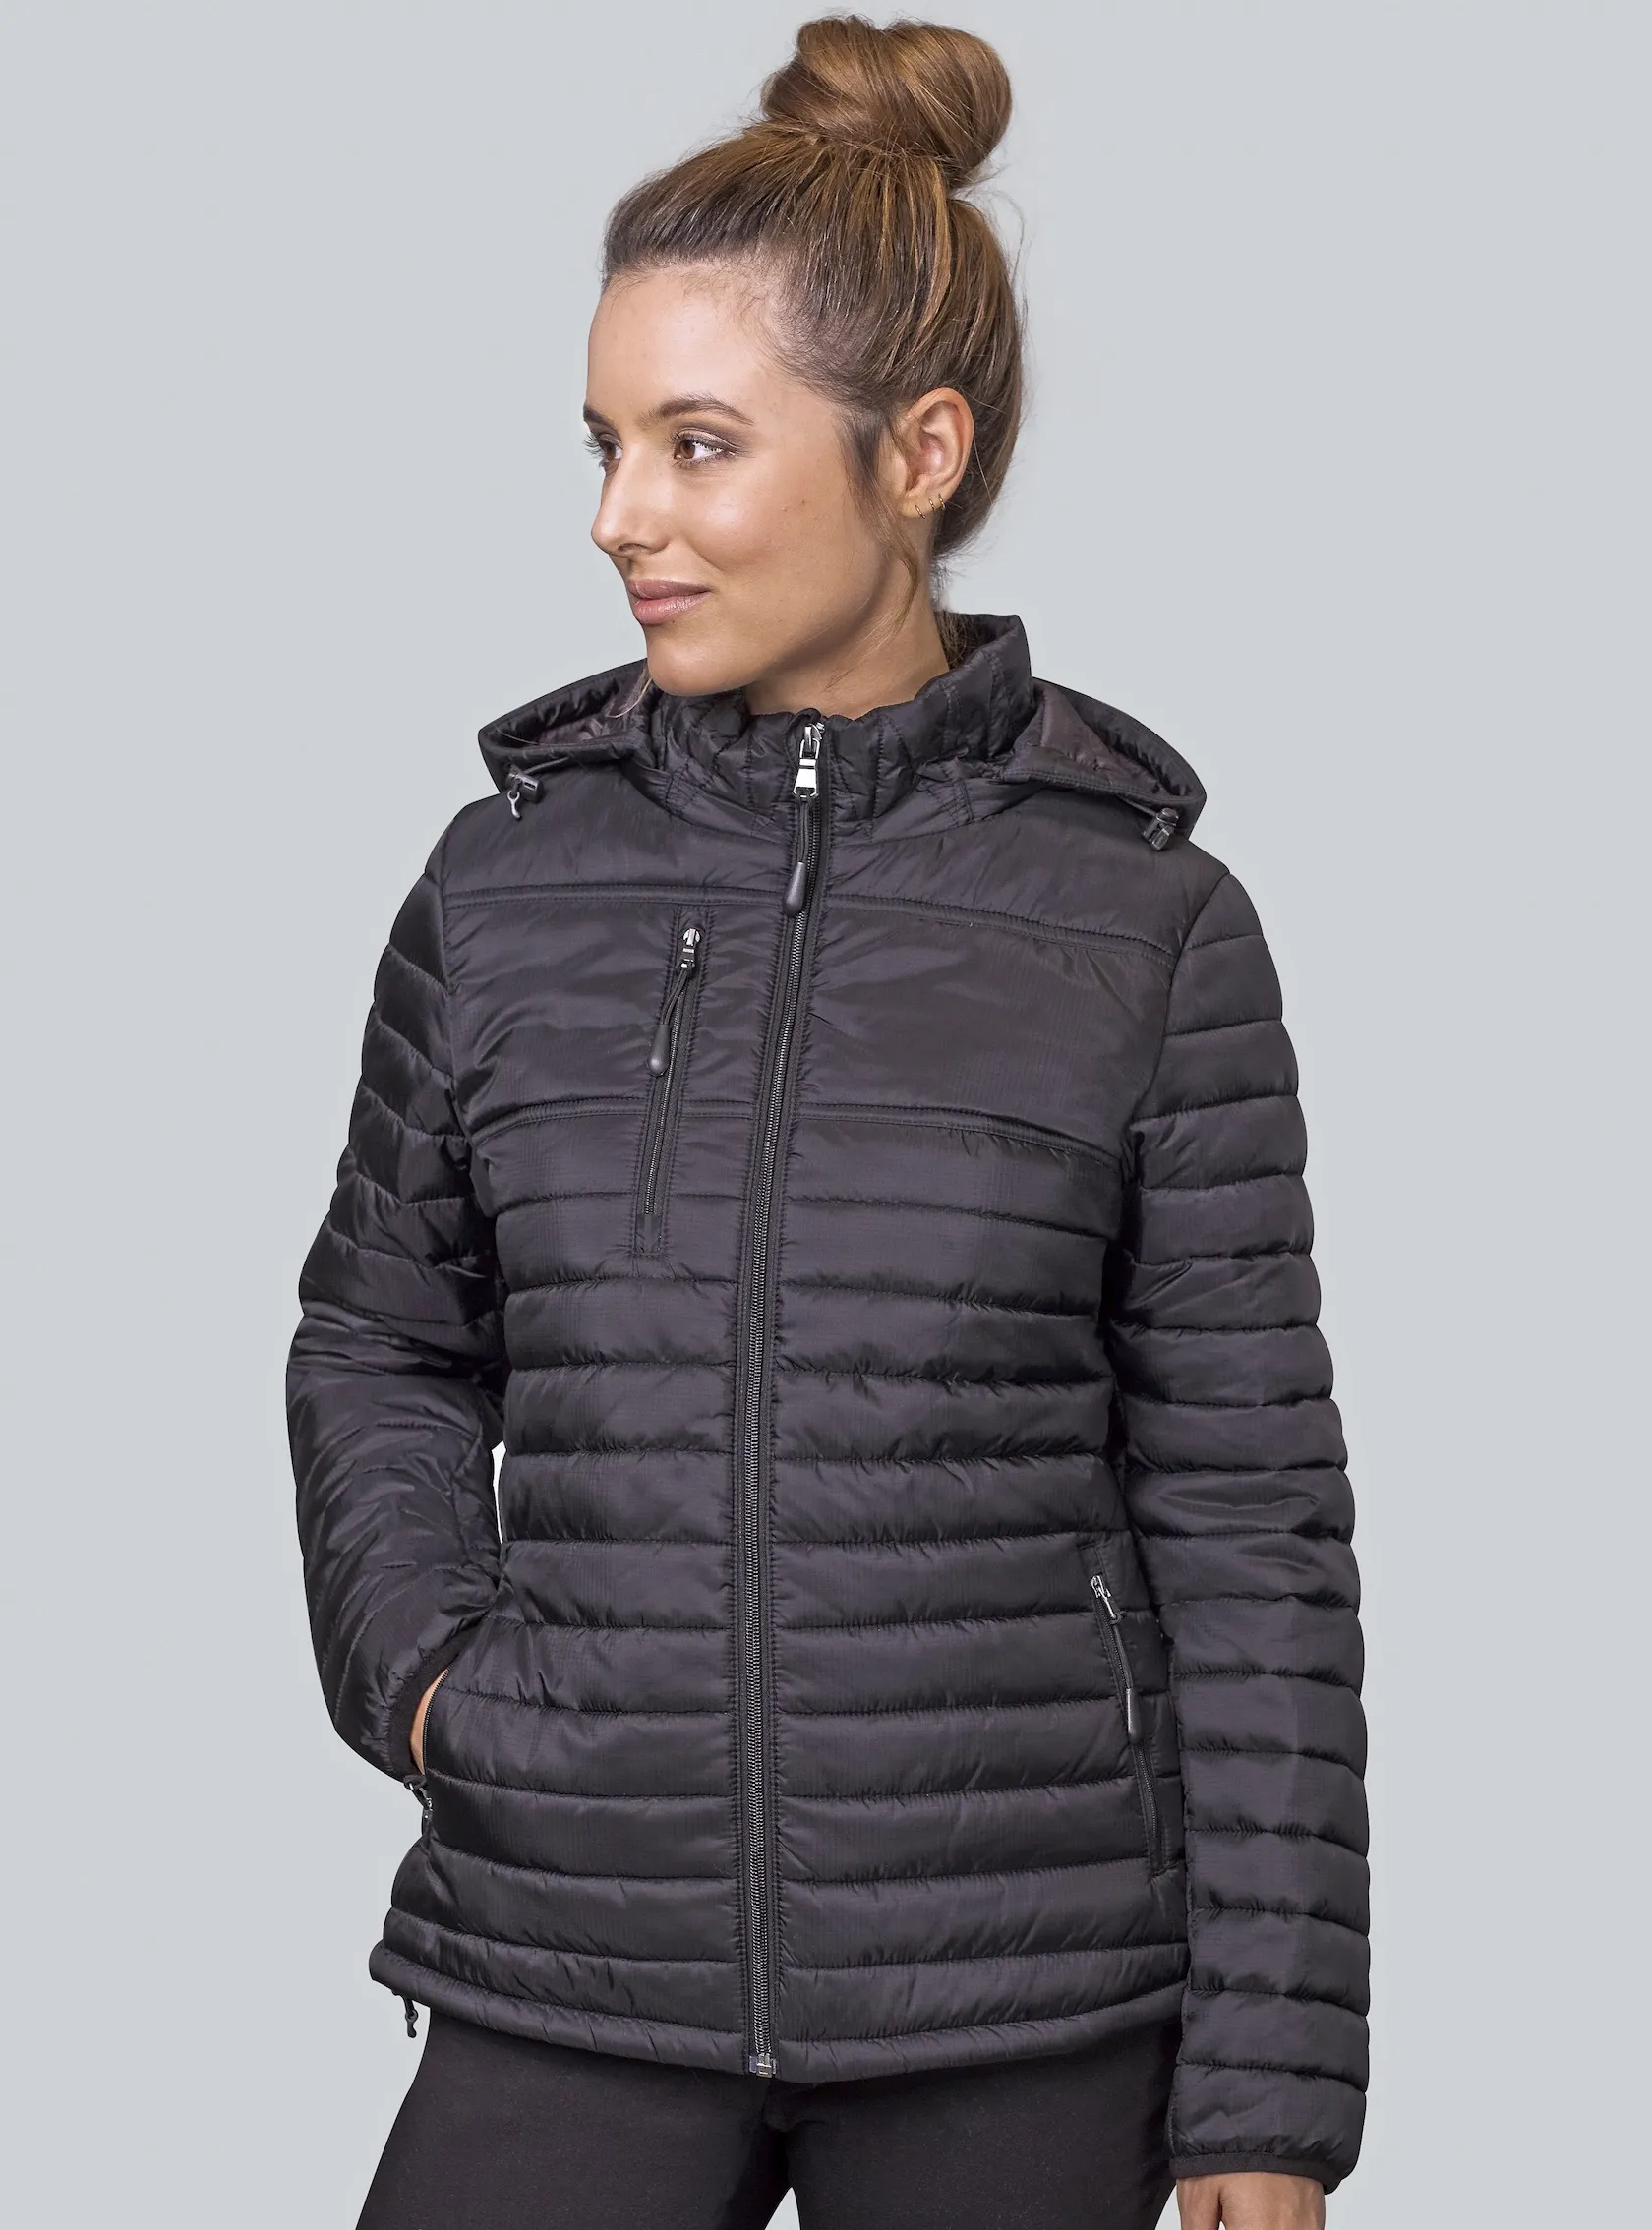 HRM Women´s Premium Quilted Jacket